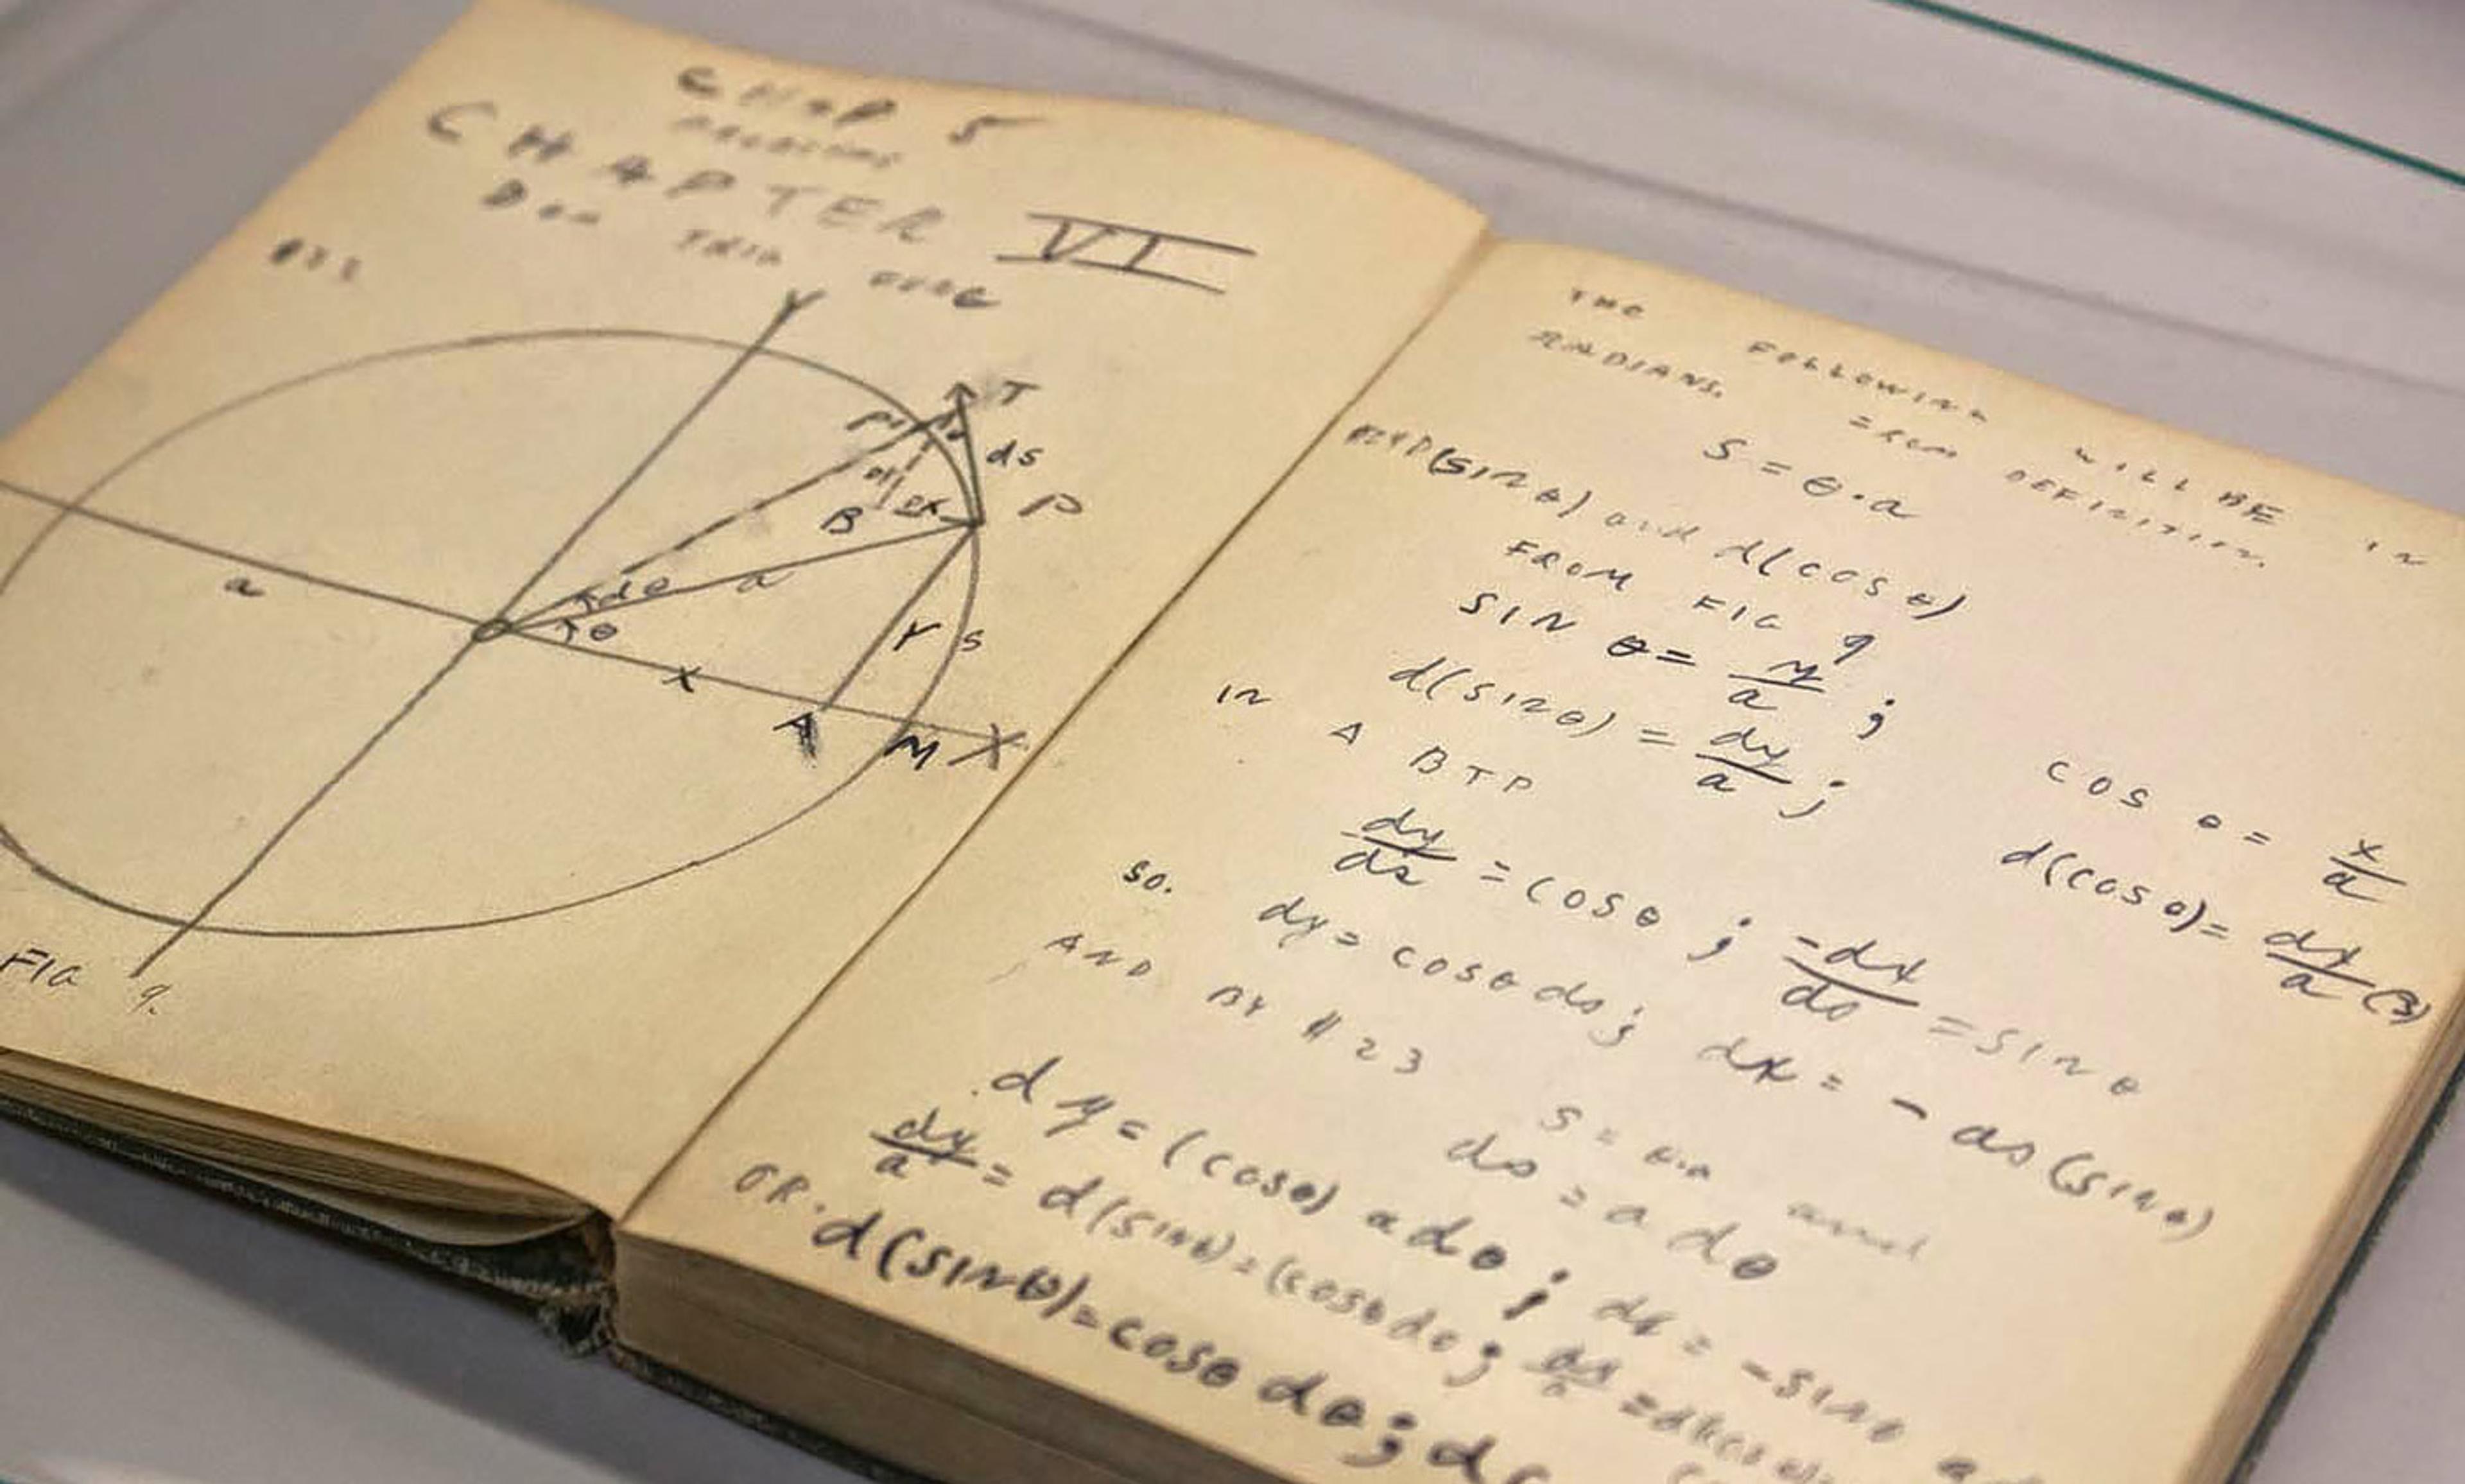 <p>Richard Feynman’s high school calculus notebook: ‘That was a way to try to get it into my head this time, instead of forgetting it. So I had learned calculus.’ <em>Courtesy </em><a href="http://physicsbuzz.physicscentral.com/2014/11/artifacts-from-archives.html" target="_blank" rel="noreferrer noopener"><em>Physics Central</em></a><em>/Niels Bohr Library and Archive</em></p>